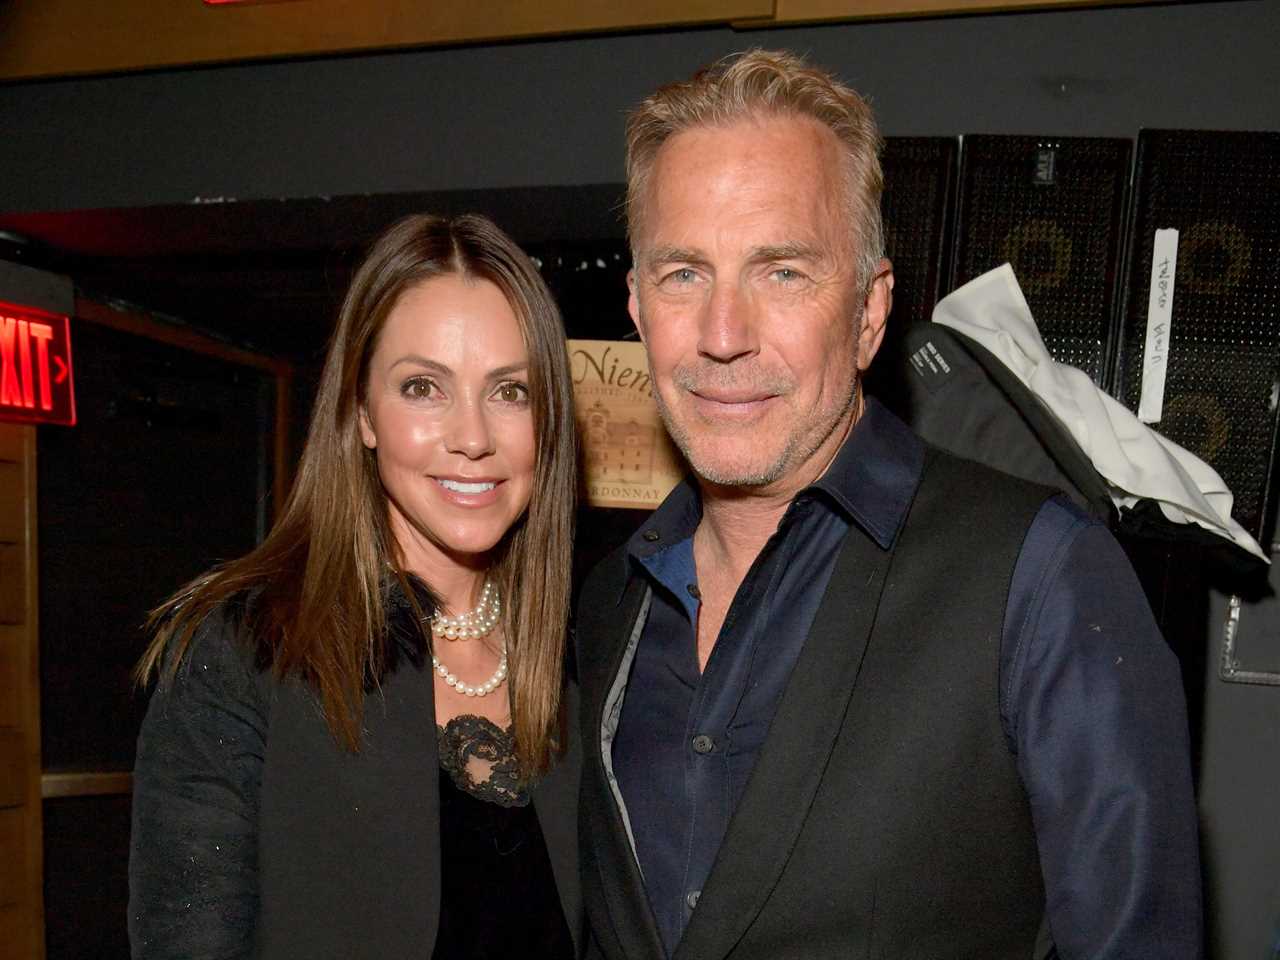 Kevin Costner and his second wife, Christine Baumgartner, are divorcing after 18 years of marriage.